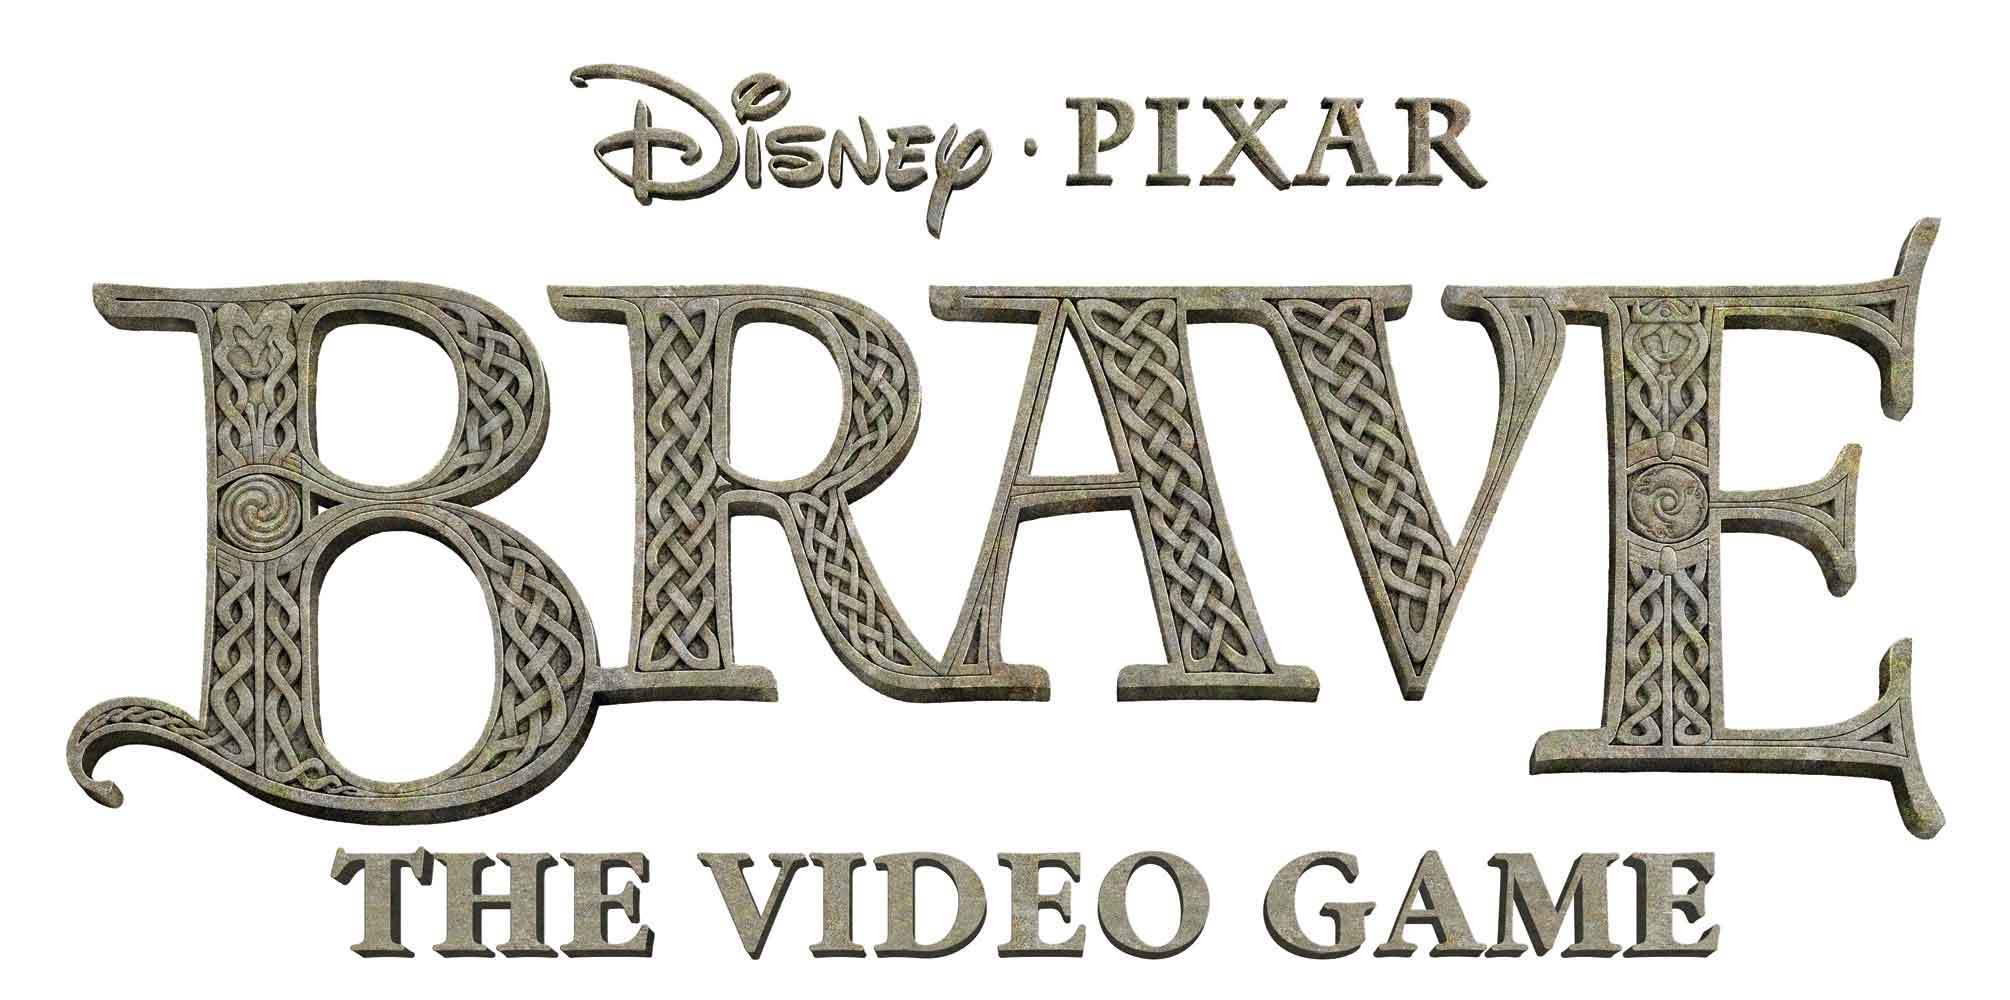 brave the video game ps3